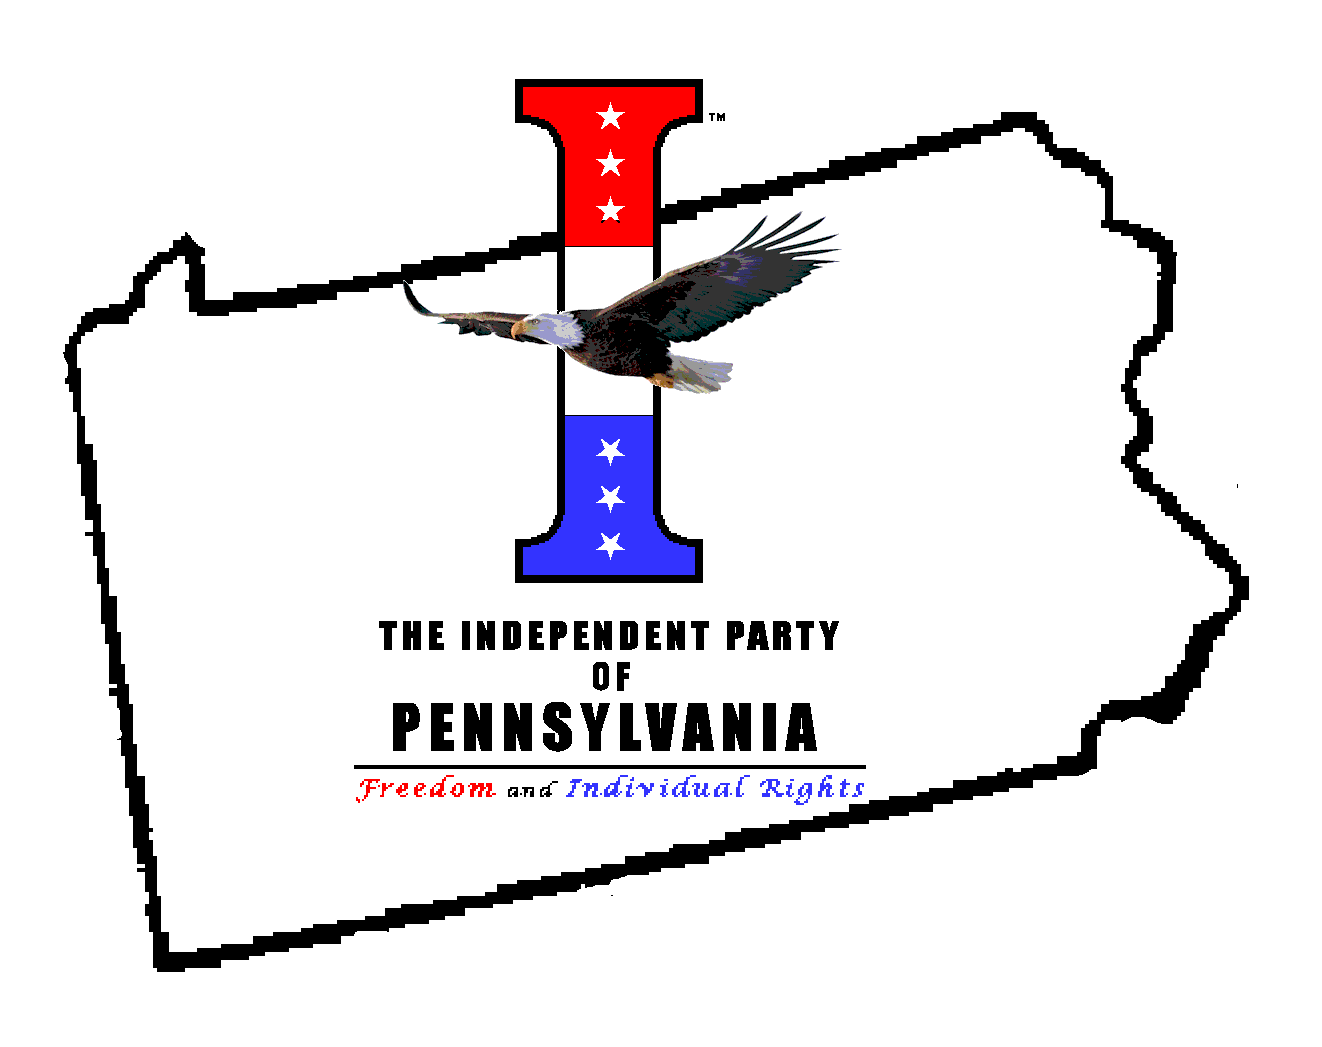 The Independent Party of Pennsylvania!